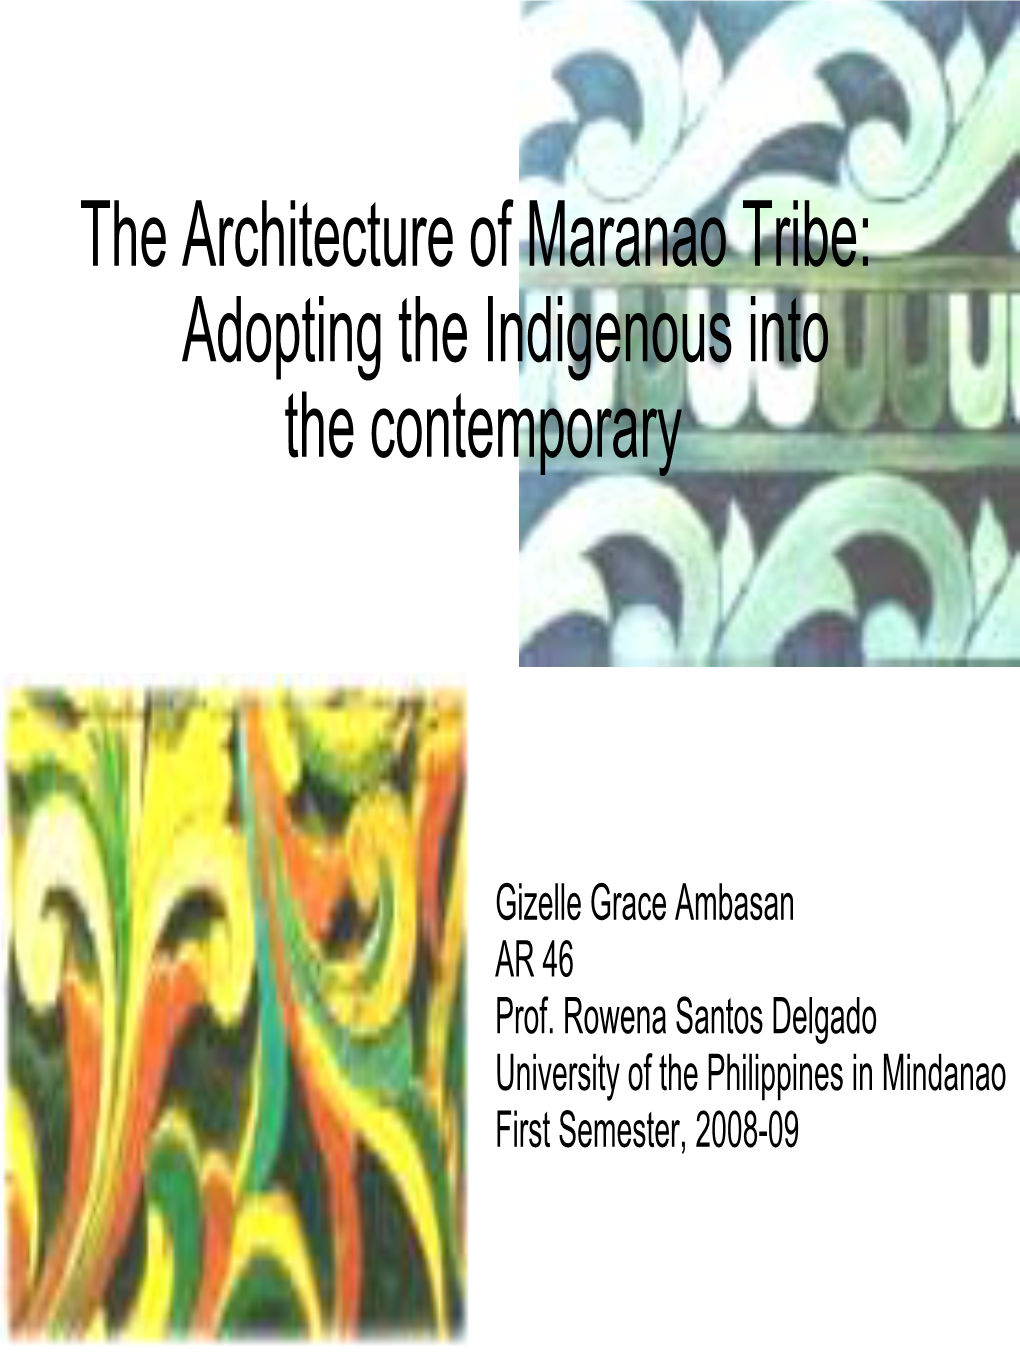 The Architecture of Maranao Tribe: Adopting the Indigenous Into the Contemporary